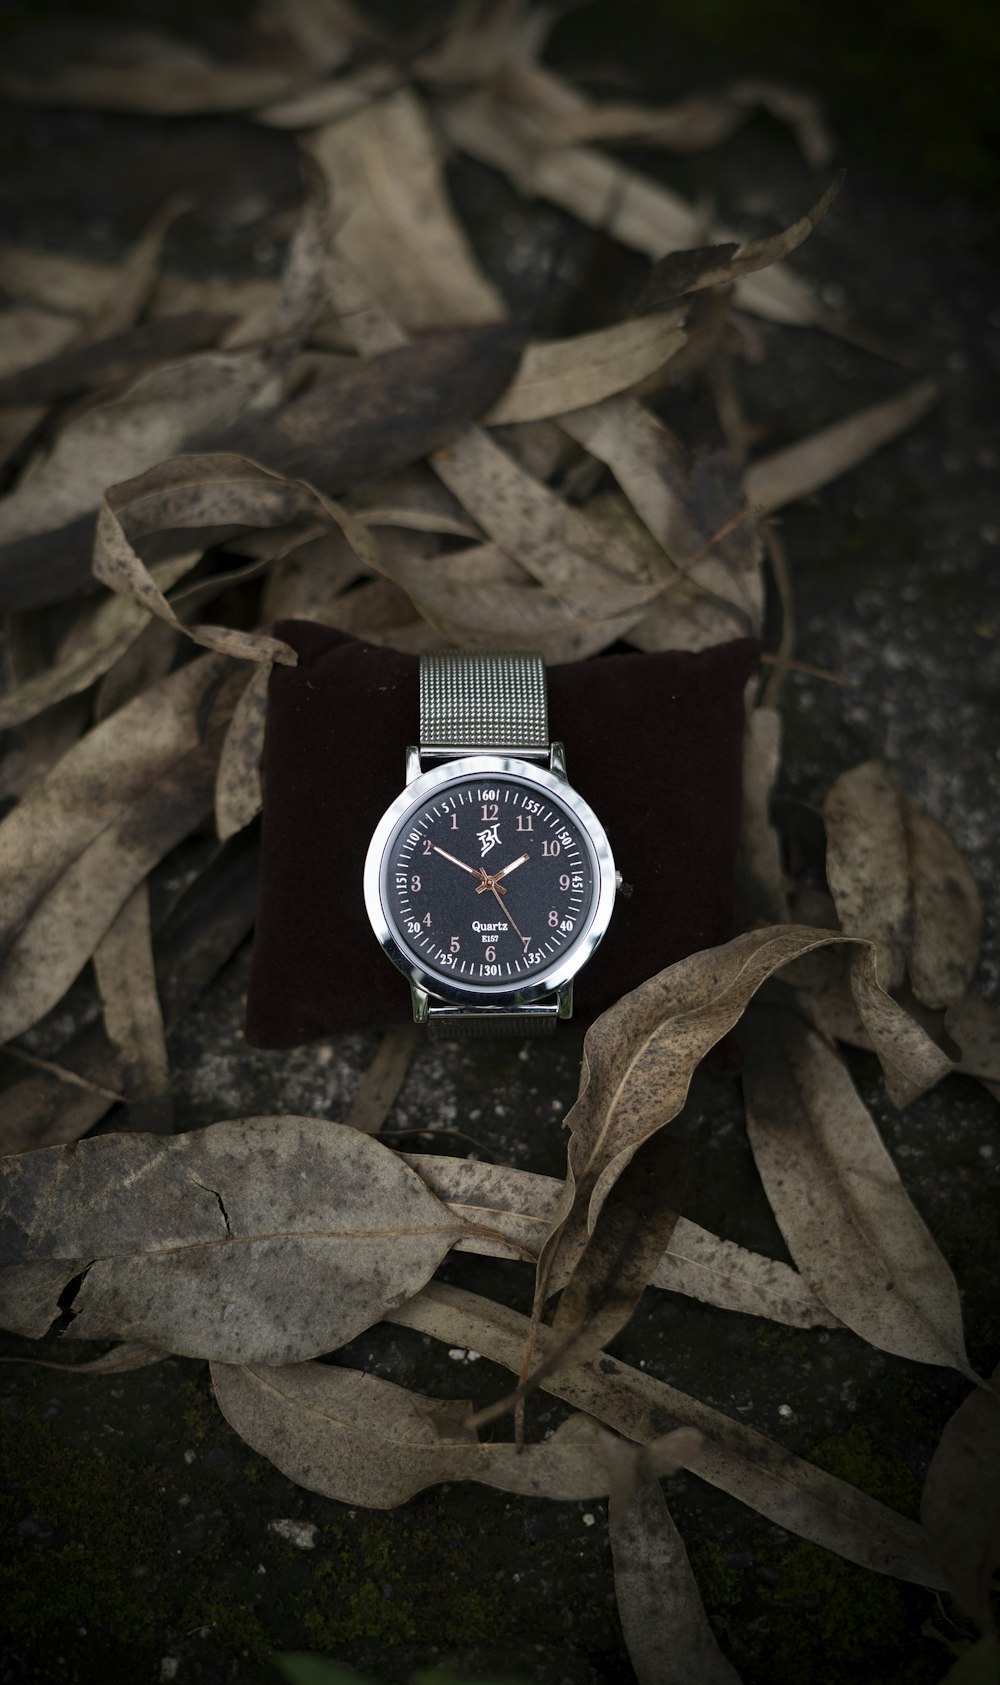 black and silver analog watch on brown dried leaves